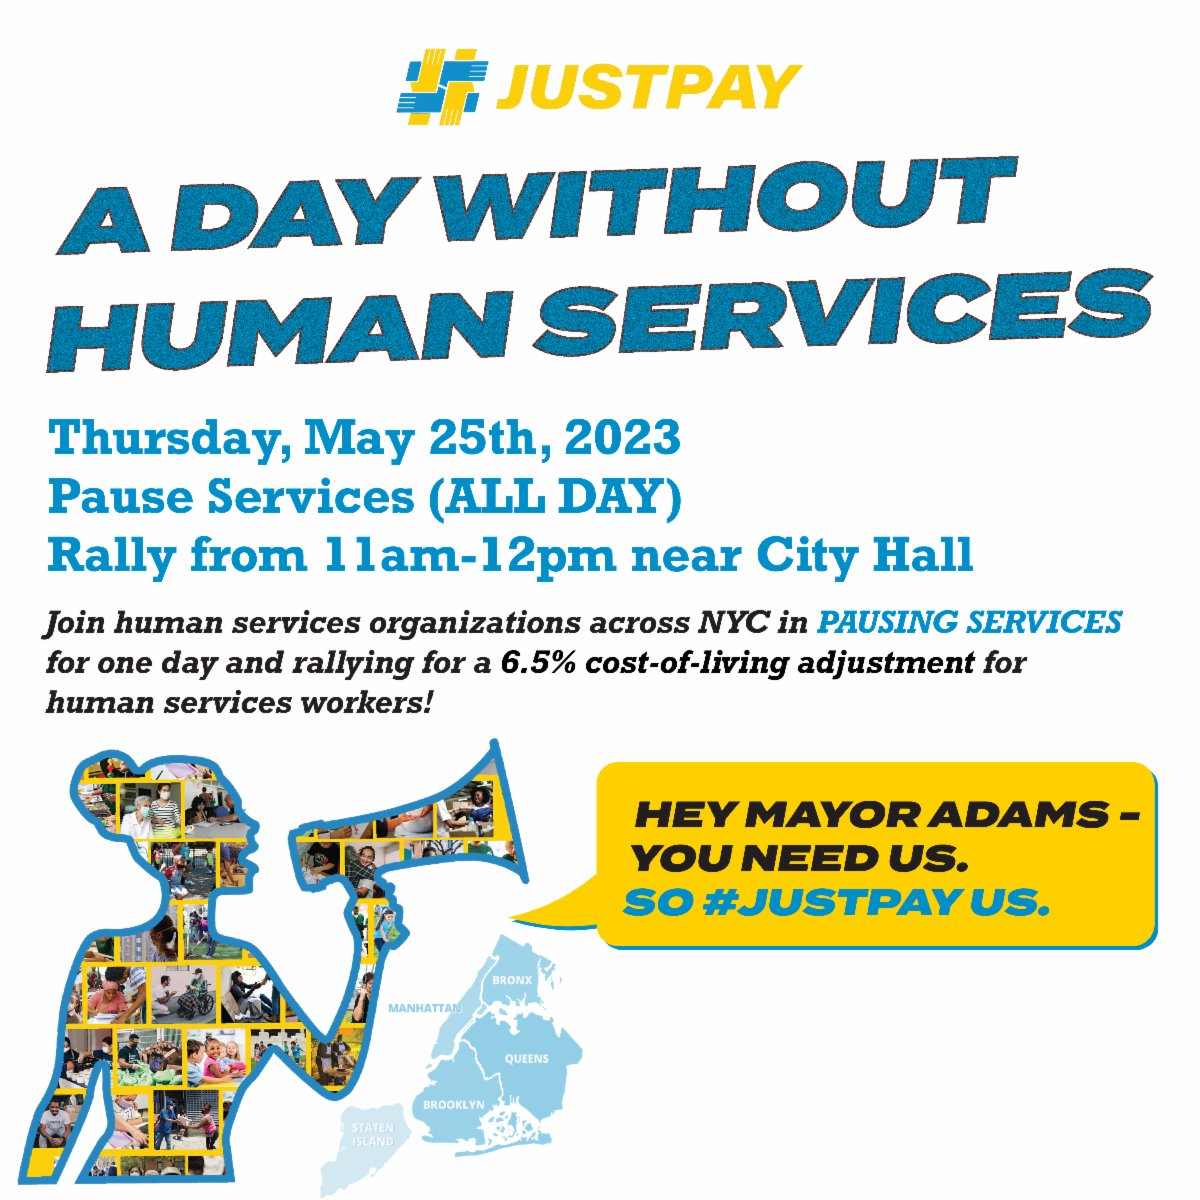 125,000 workers and 8.5 million New Yorkers are impacted by today’s #DayWithoutHumanServices. As staff turnover forces more programs to close, this might become a reality if @NYCMayor doesn’t #JustPay human services workers in the City budget! @HenryStreet @CAMBAInc @VOAgny